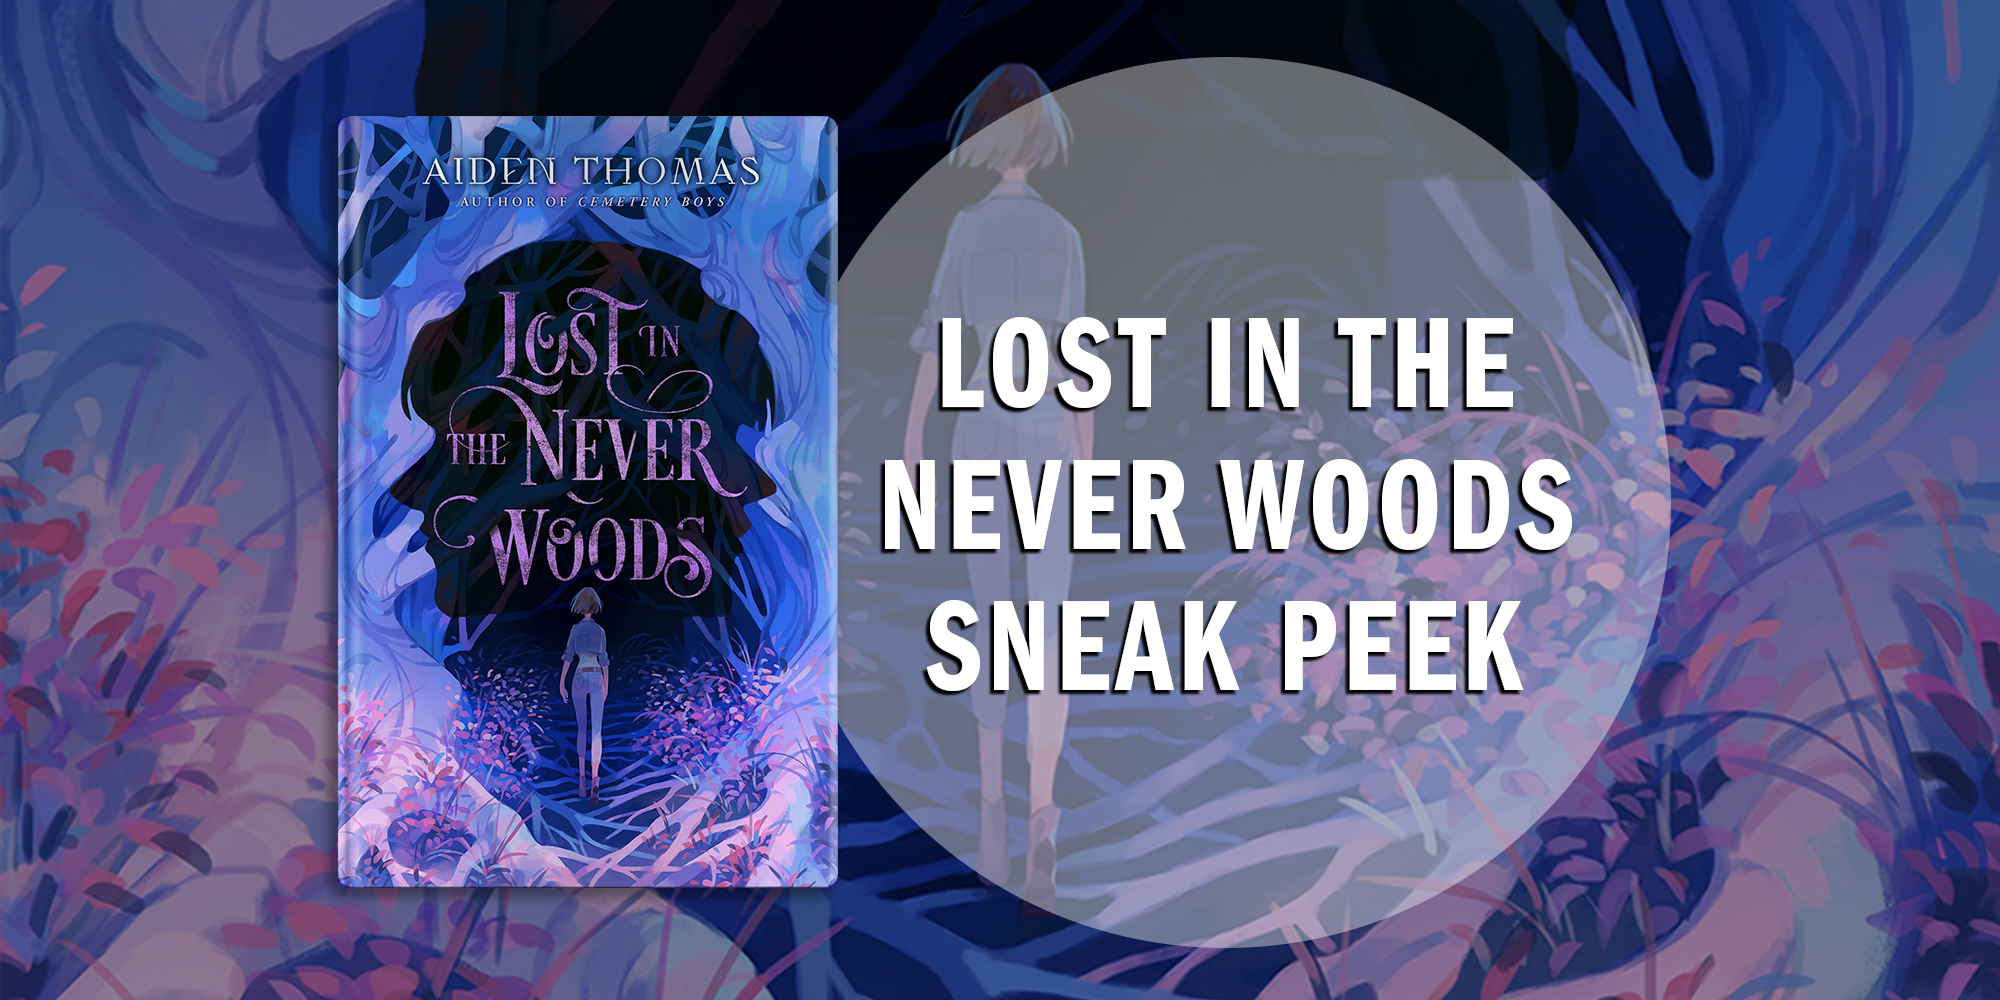 Get Lost in the Never Woods With a Special Sneak Peek